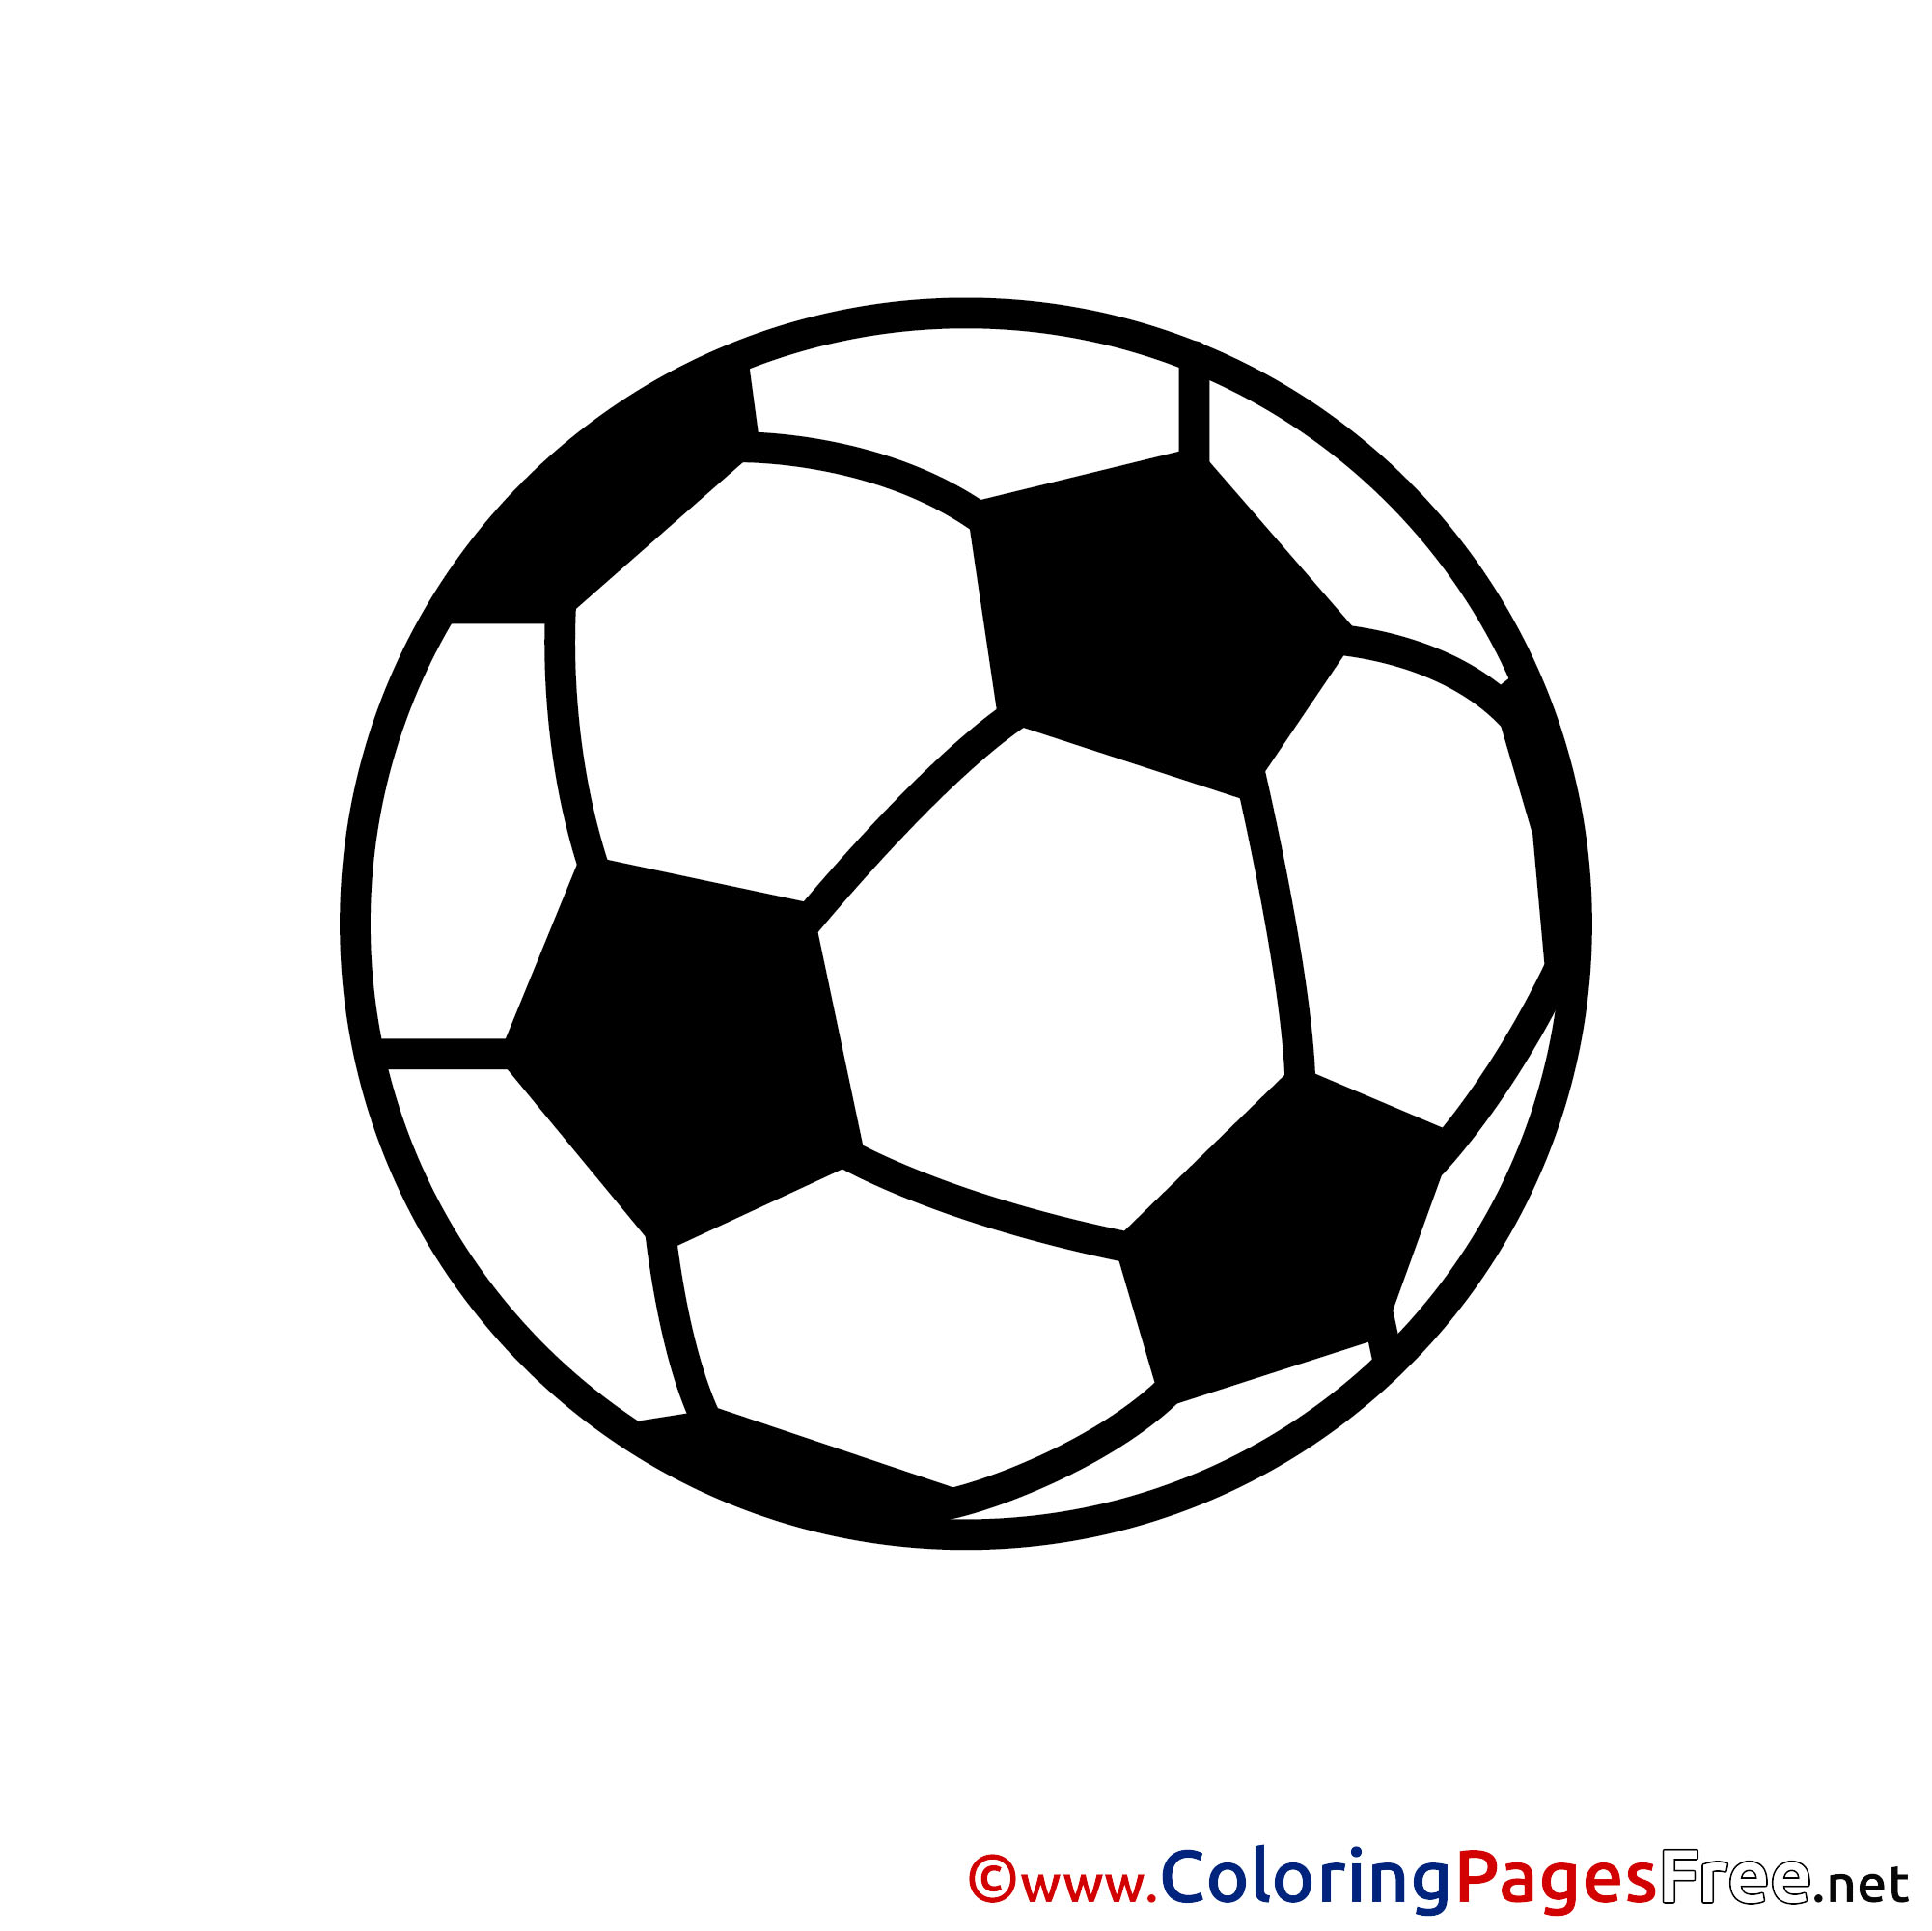 Download Soccer Ball Colouring Page printable free